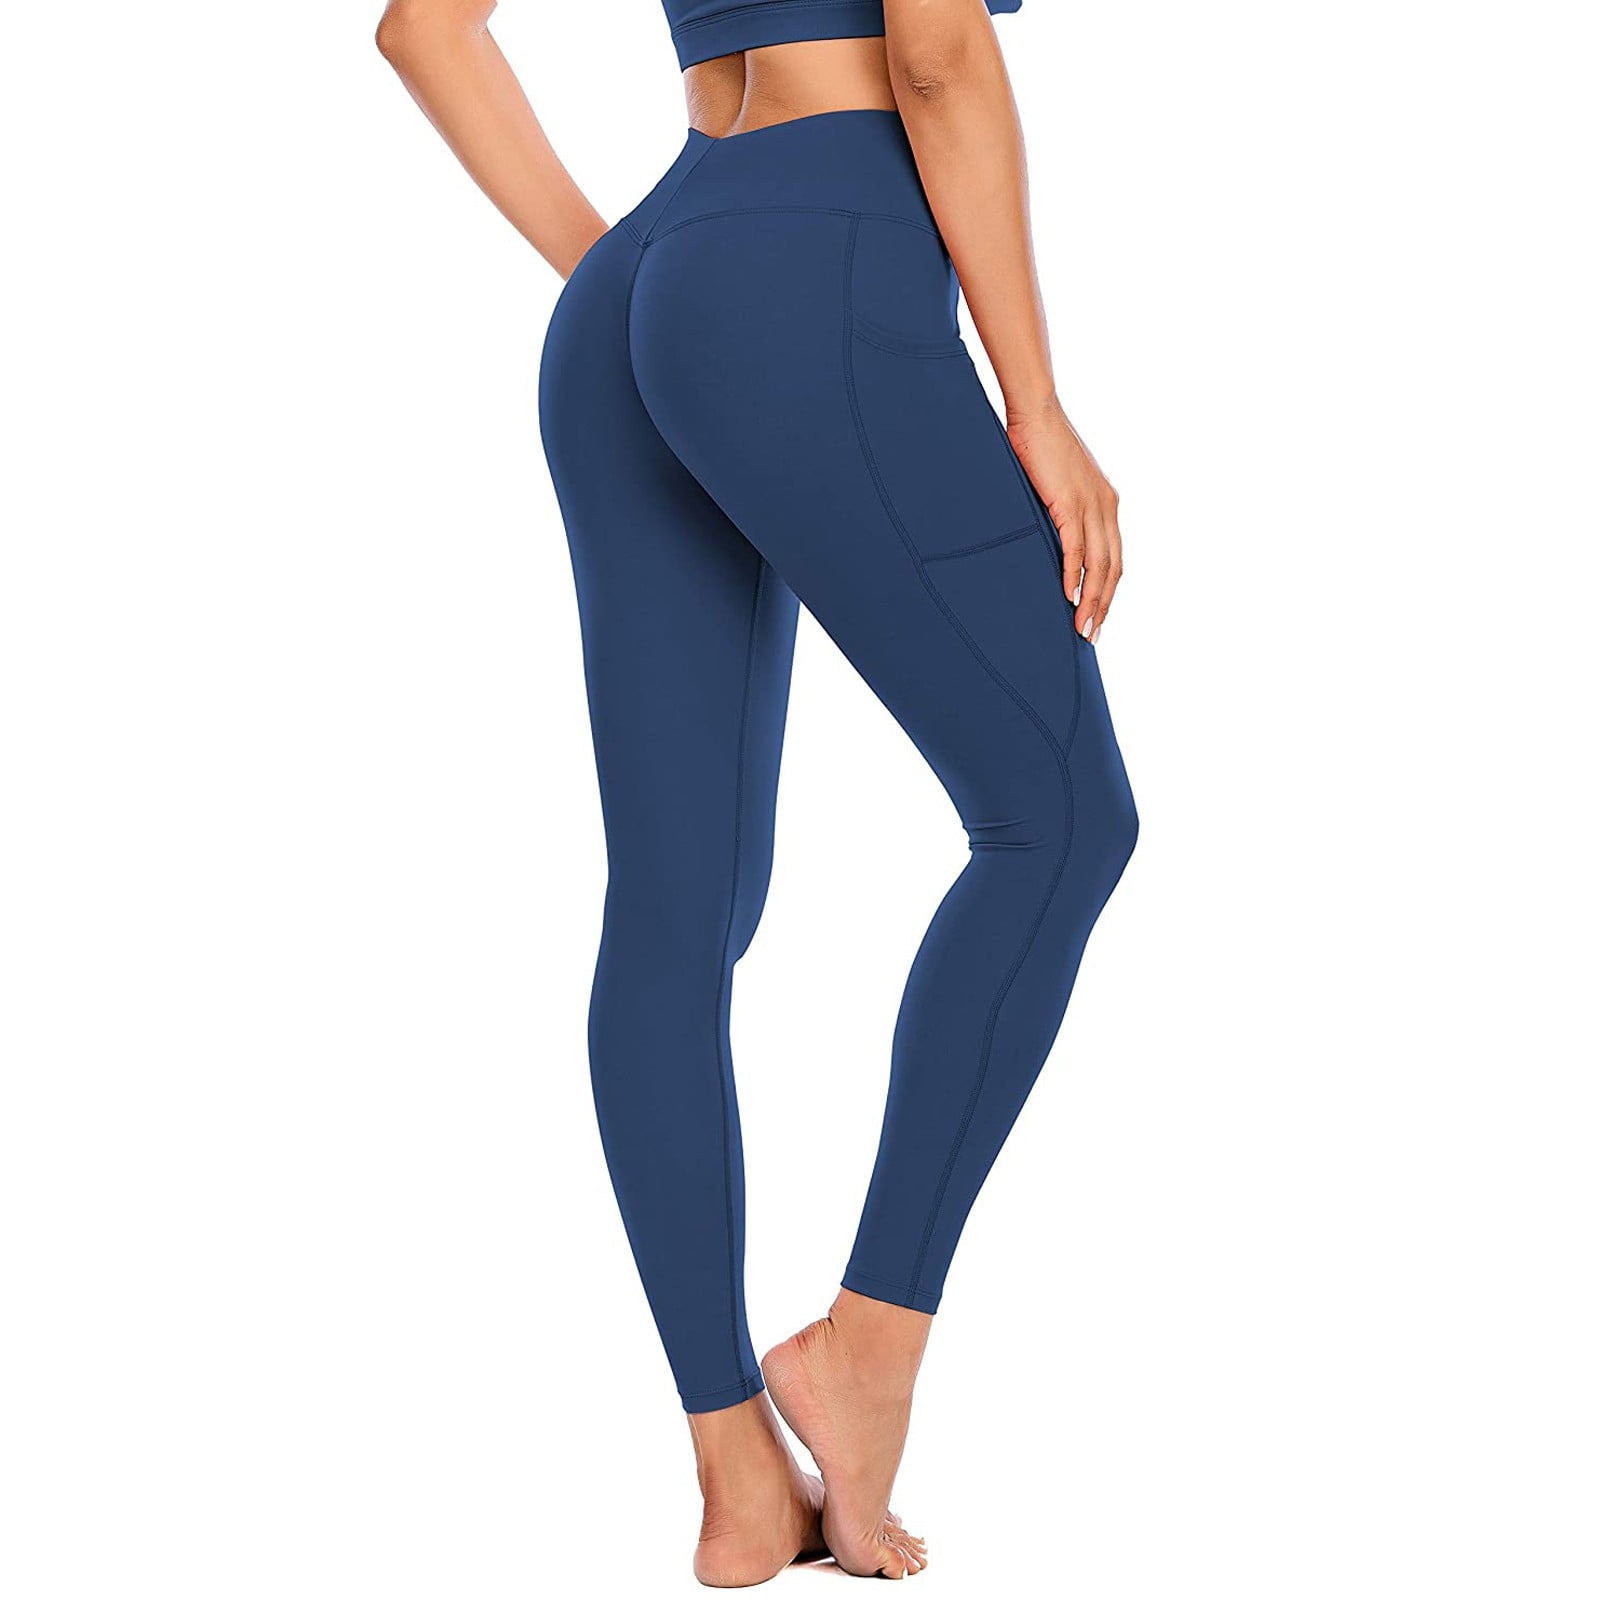 TOWED22 High Waisted Leggings For Women,High Waisted Christmas Women's  Leggings Yoga Pants Tummy Control Workout Leggings Running Clothing(Blue,L)  